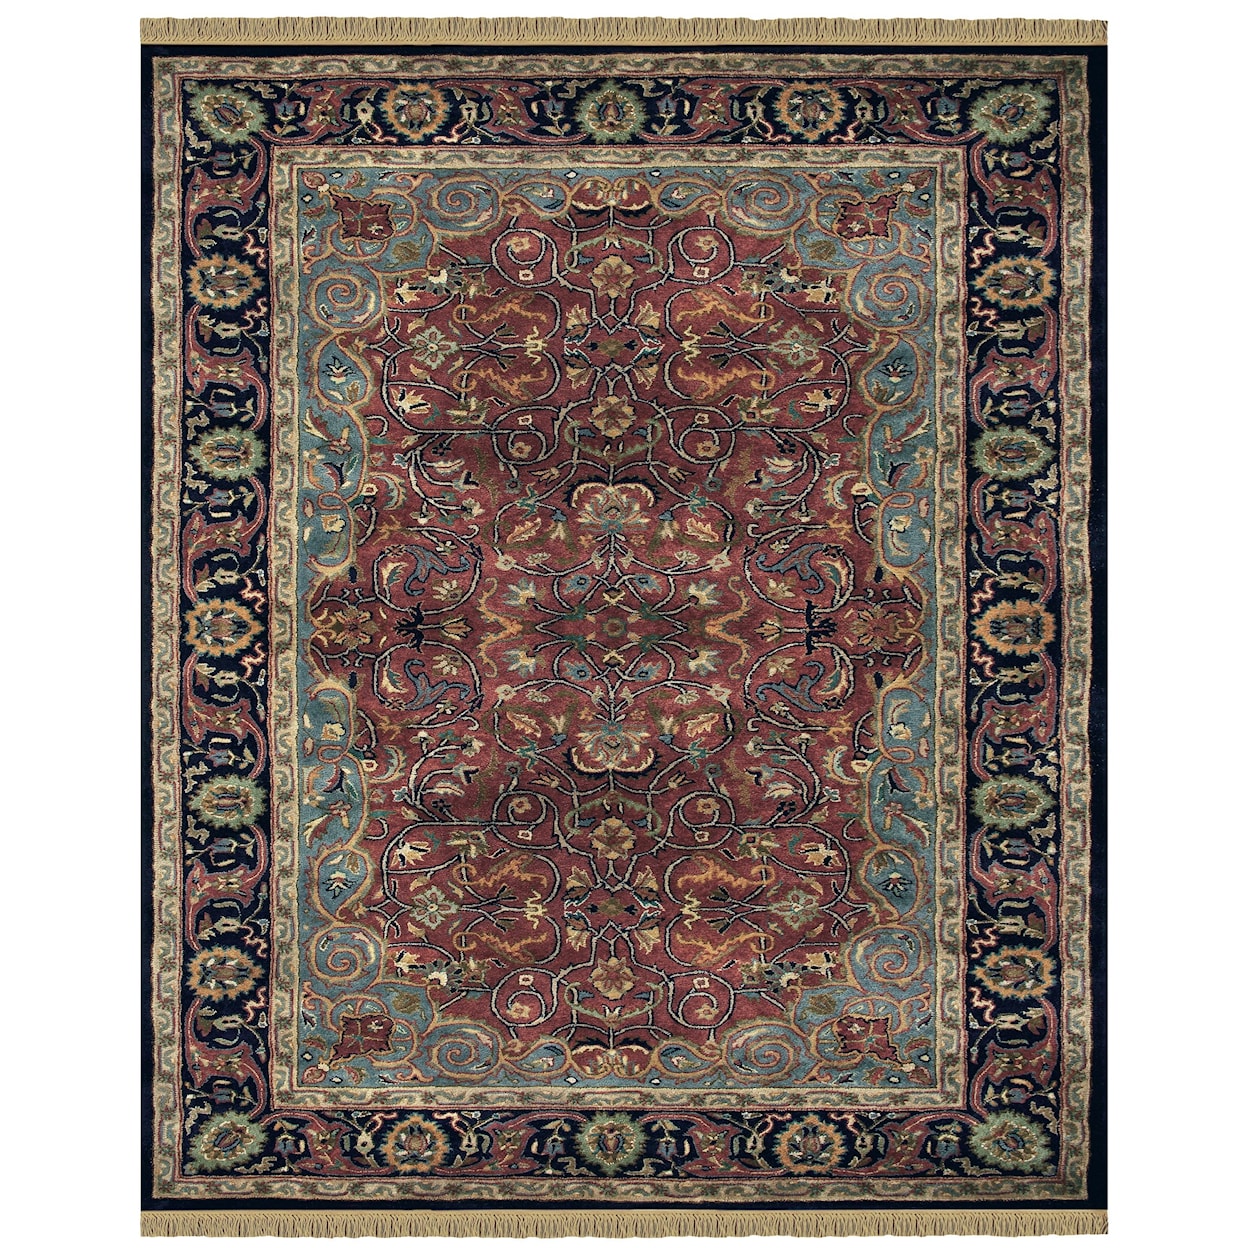 Feizy Rugs Amore Plum 8' x 8' Round Area Rug